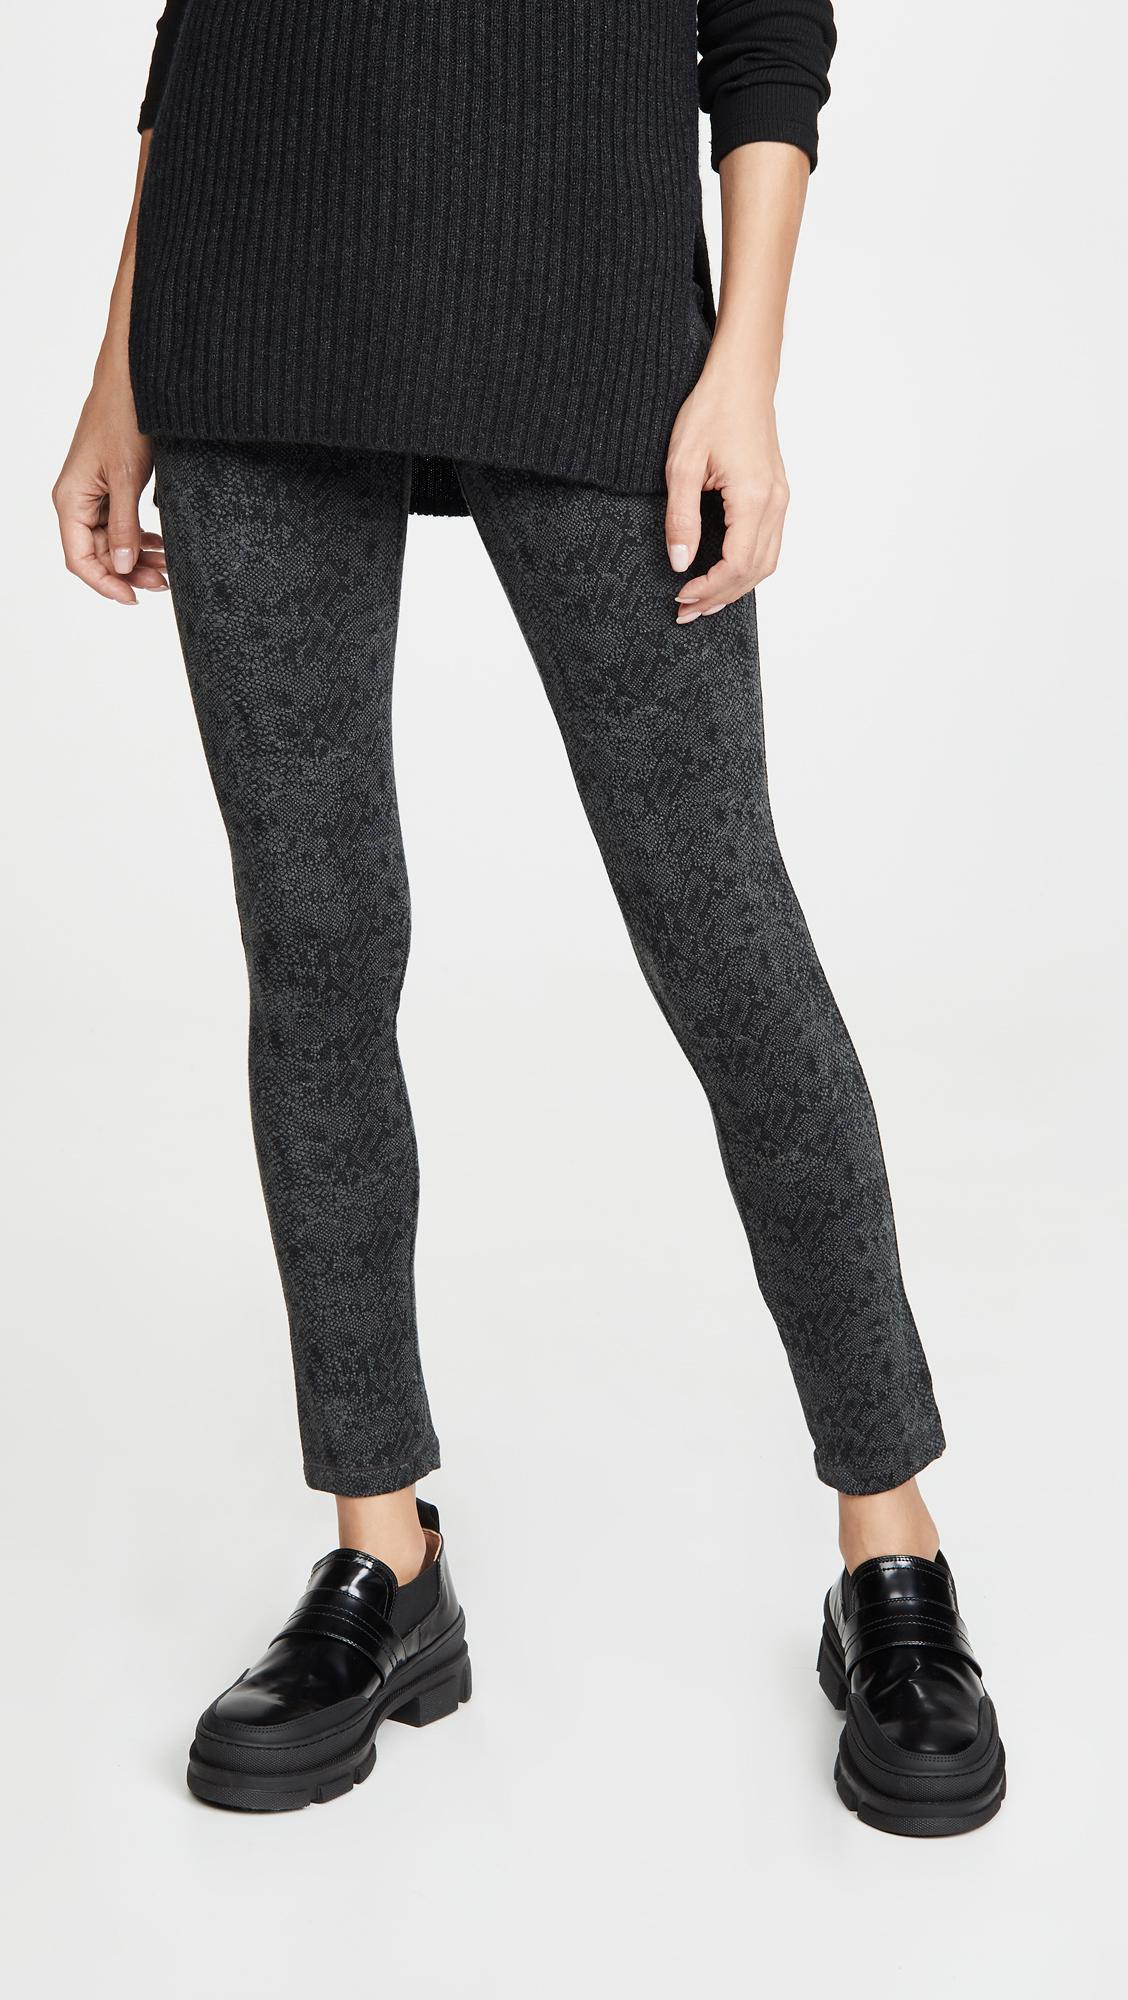 Splendid Cotton French Terry Leggings in Charcoal (Gray) - Lyst